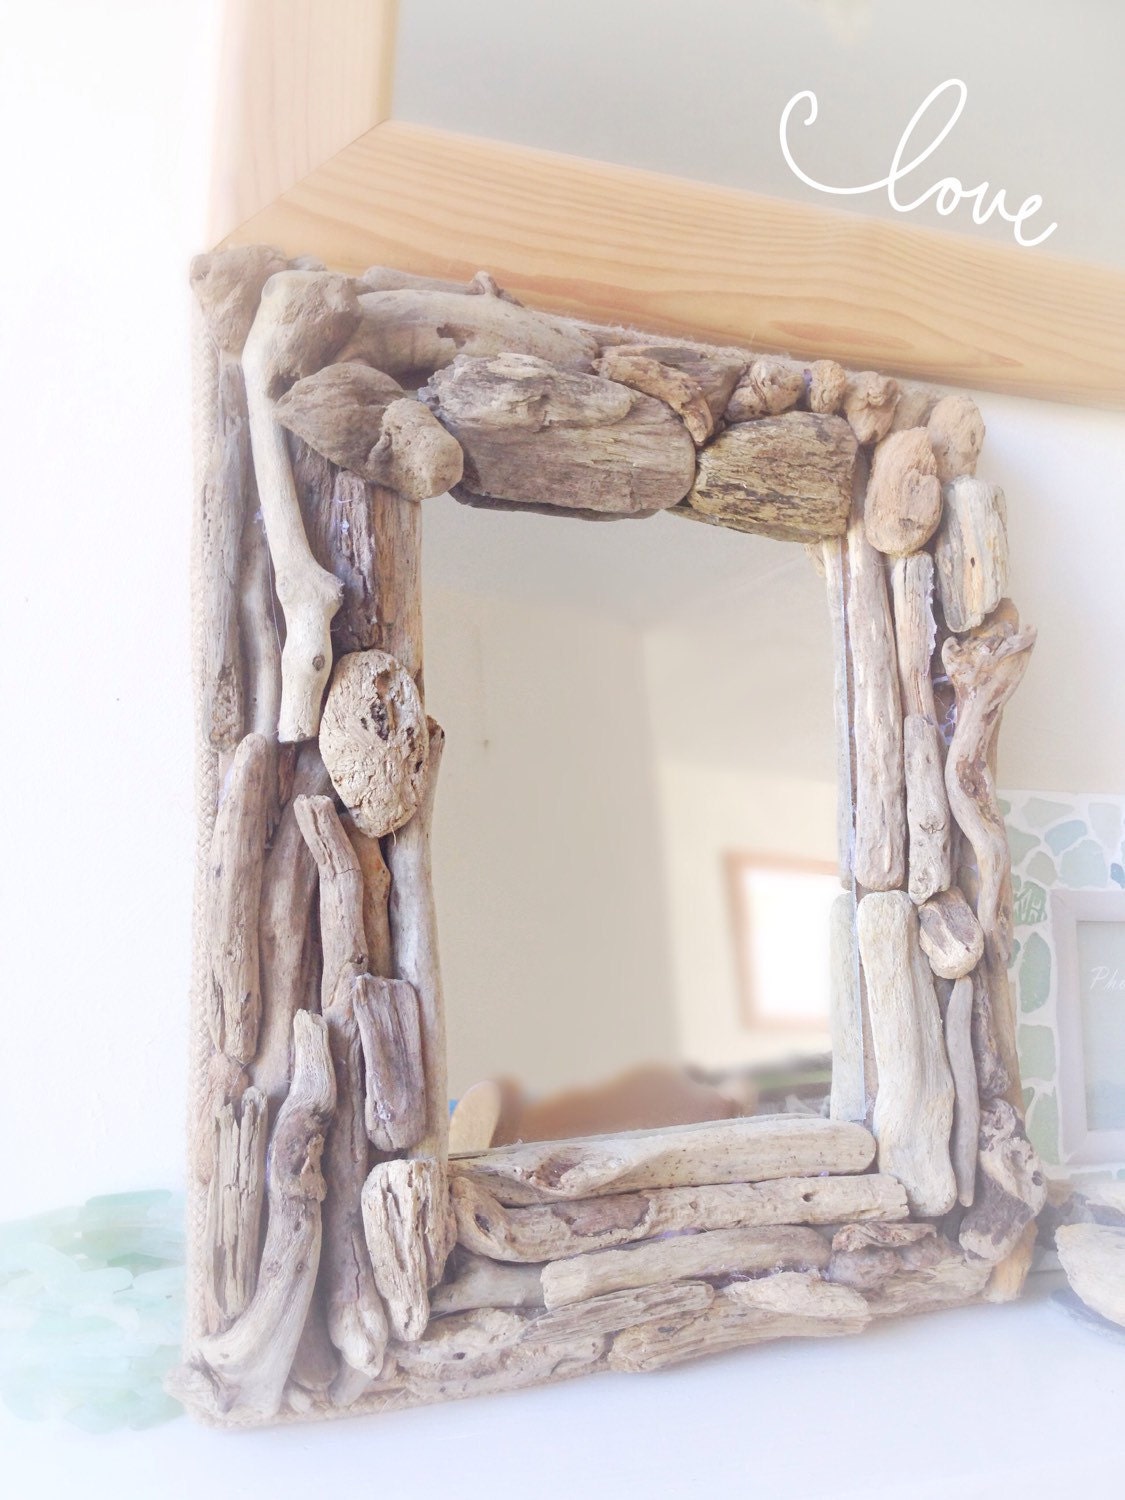 Driftwood Mirror Natural Isle of Wight Beach Home Decor